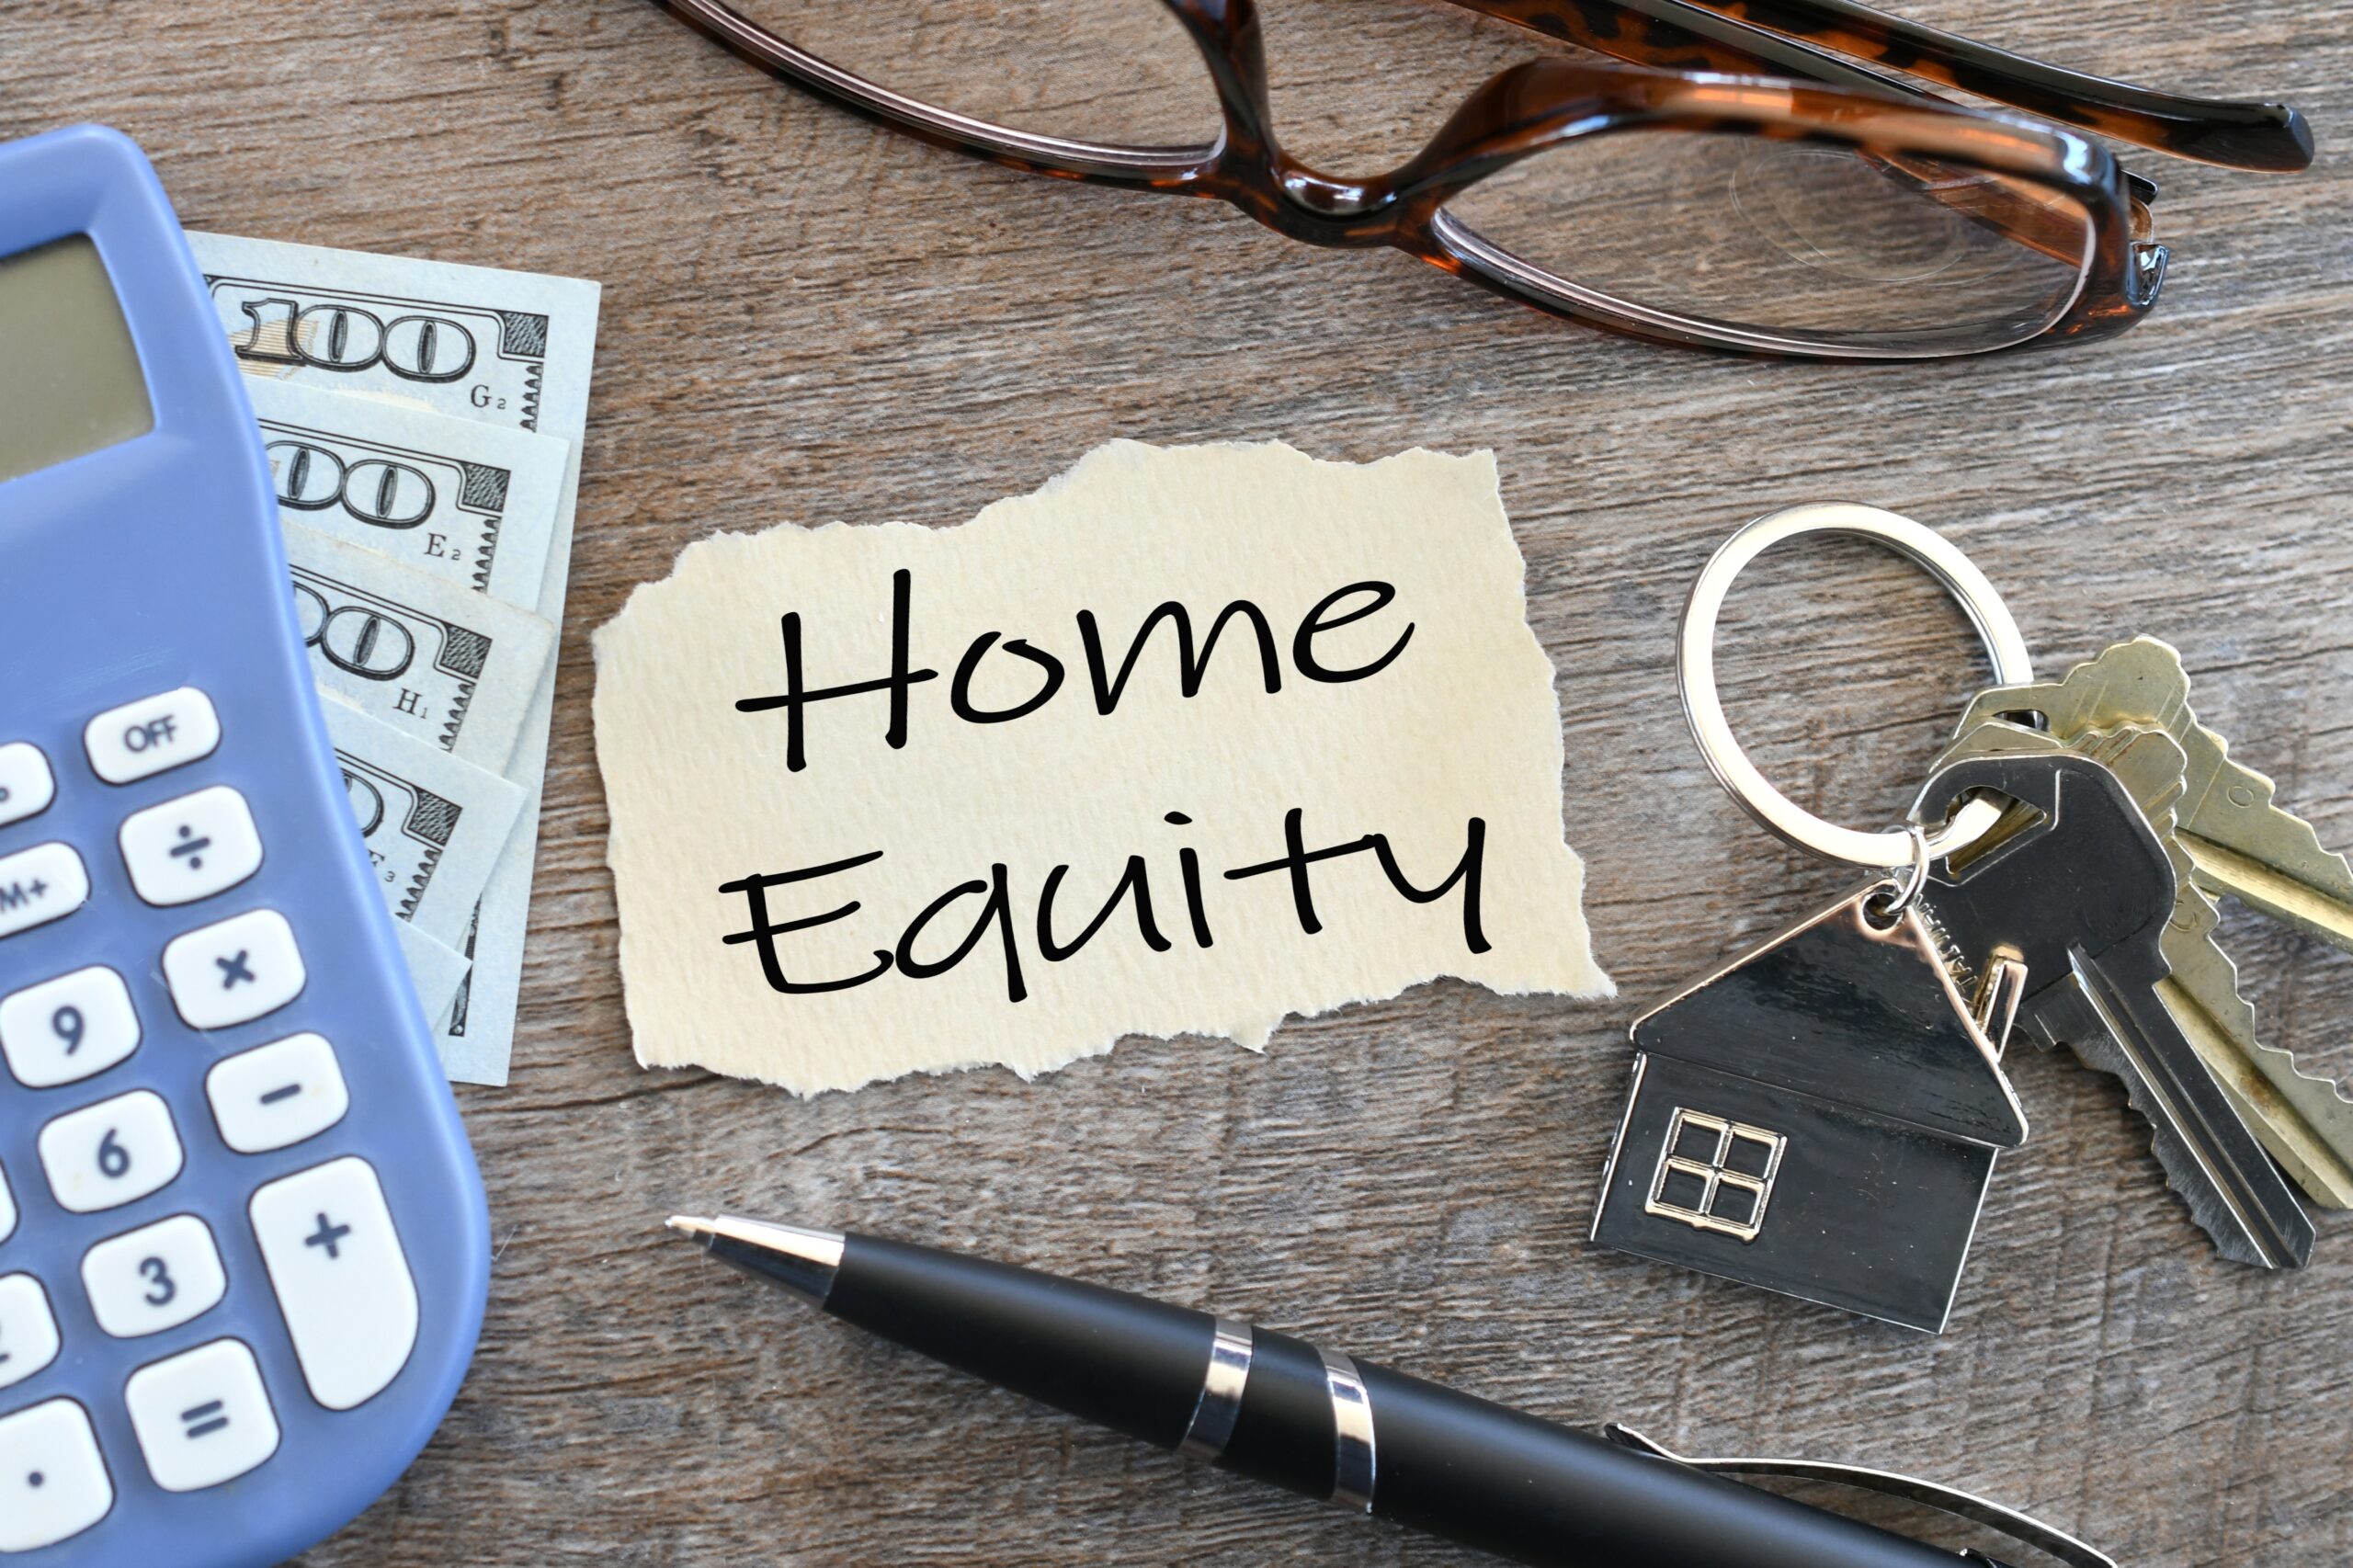 The Average Homeowner Gained $56,700 in Equity over the Past Year